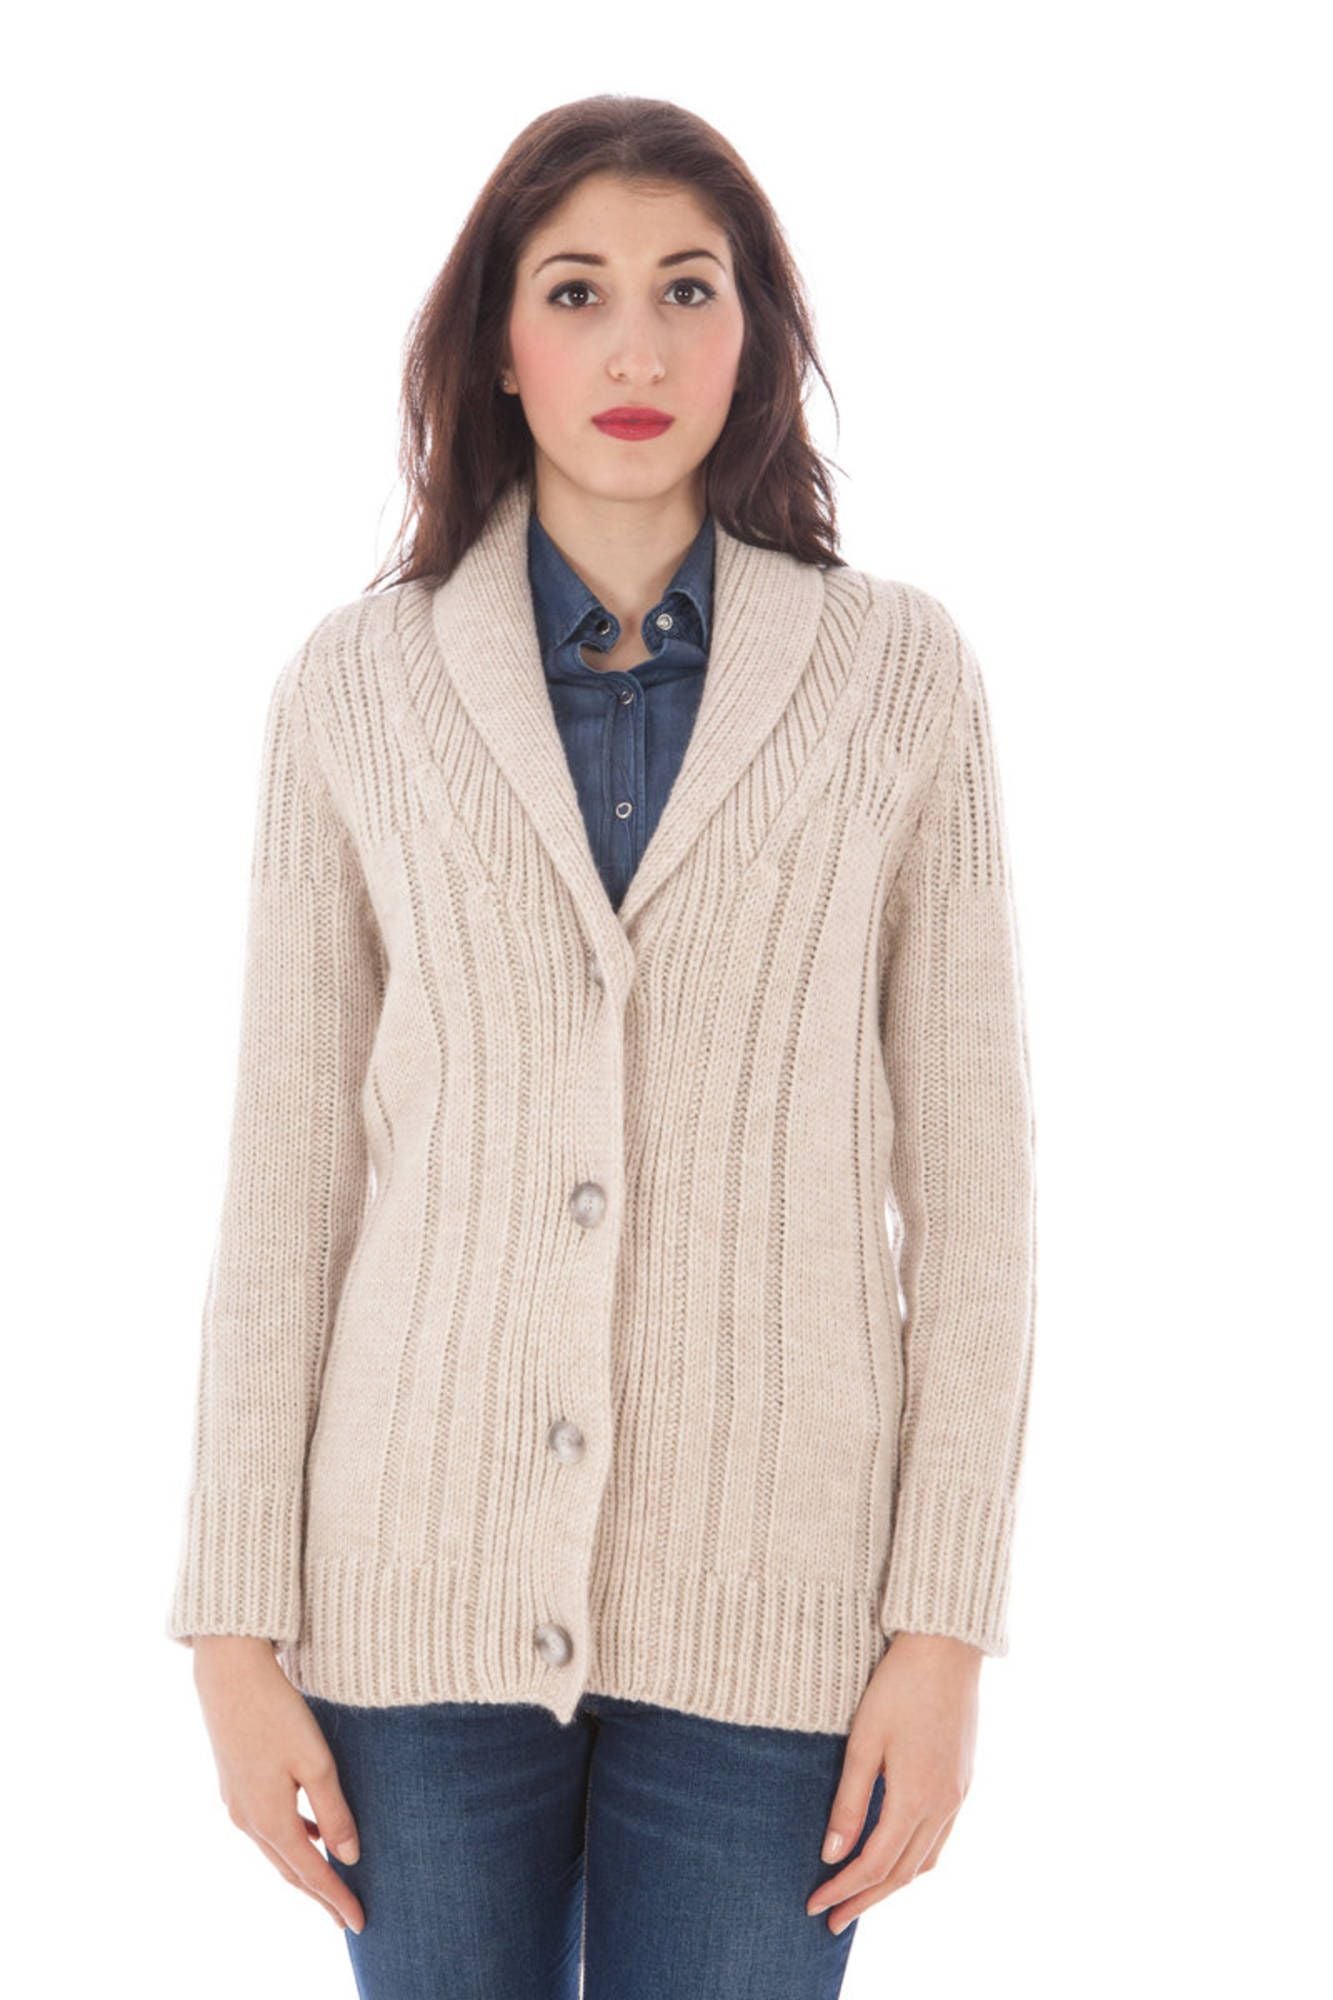 FRED PERRY CARDIGAN WOMAN BEIGE-Maglie-FRED PERRY-BEIGE-S-Urbanheer